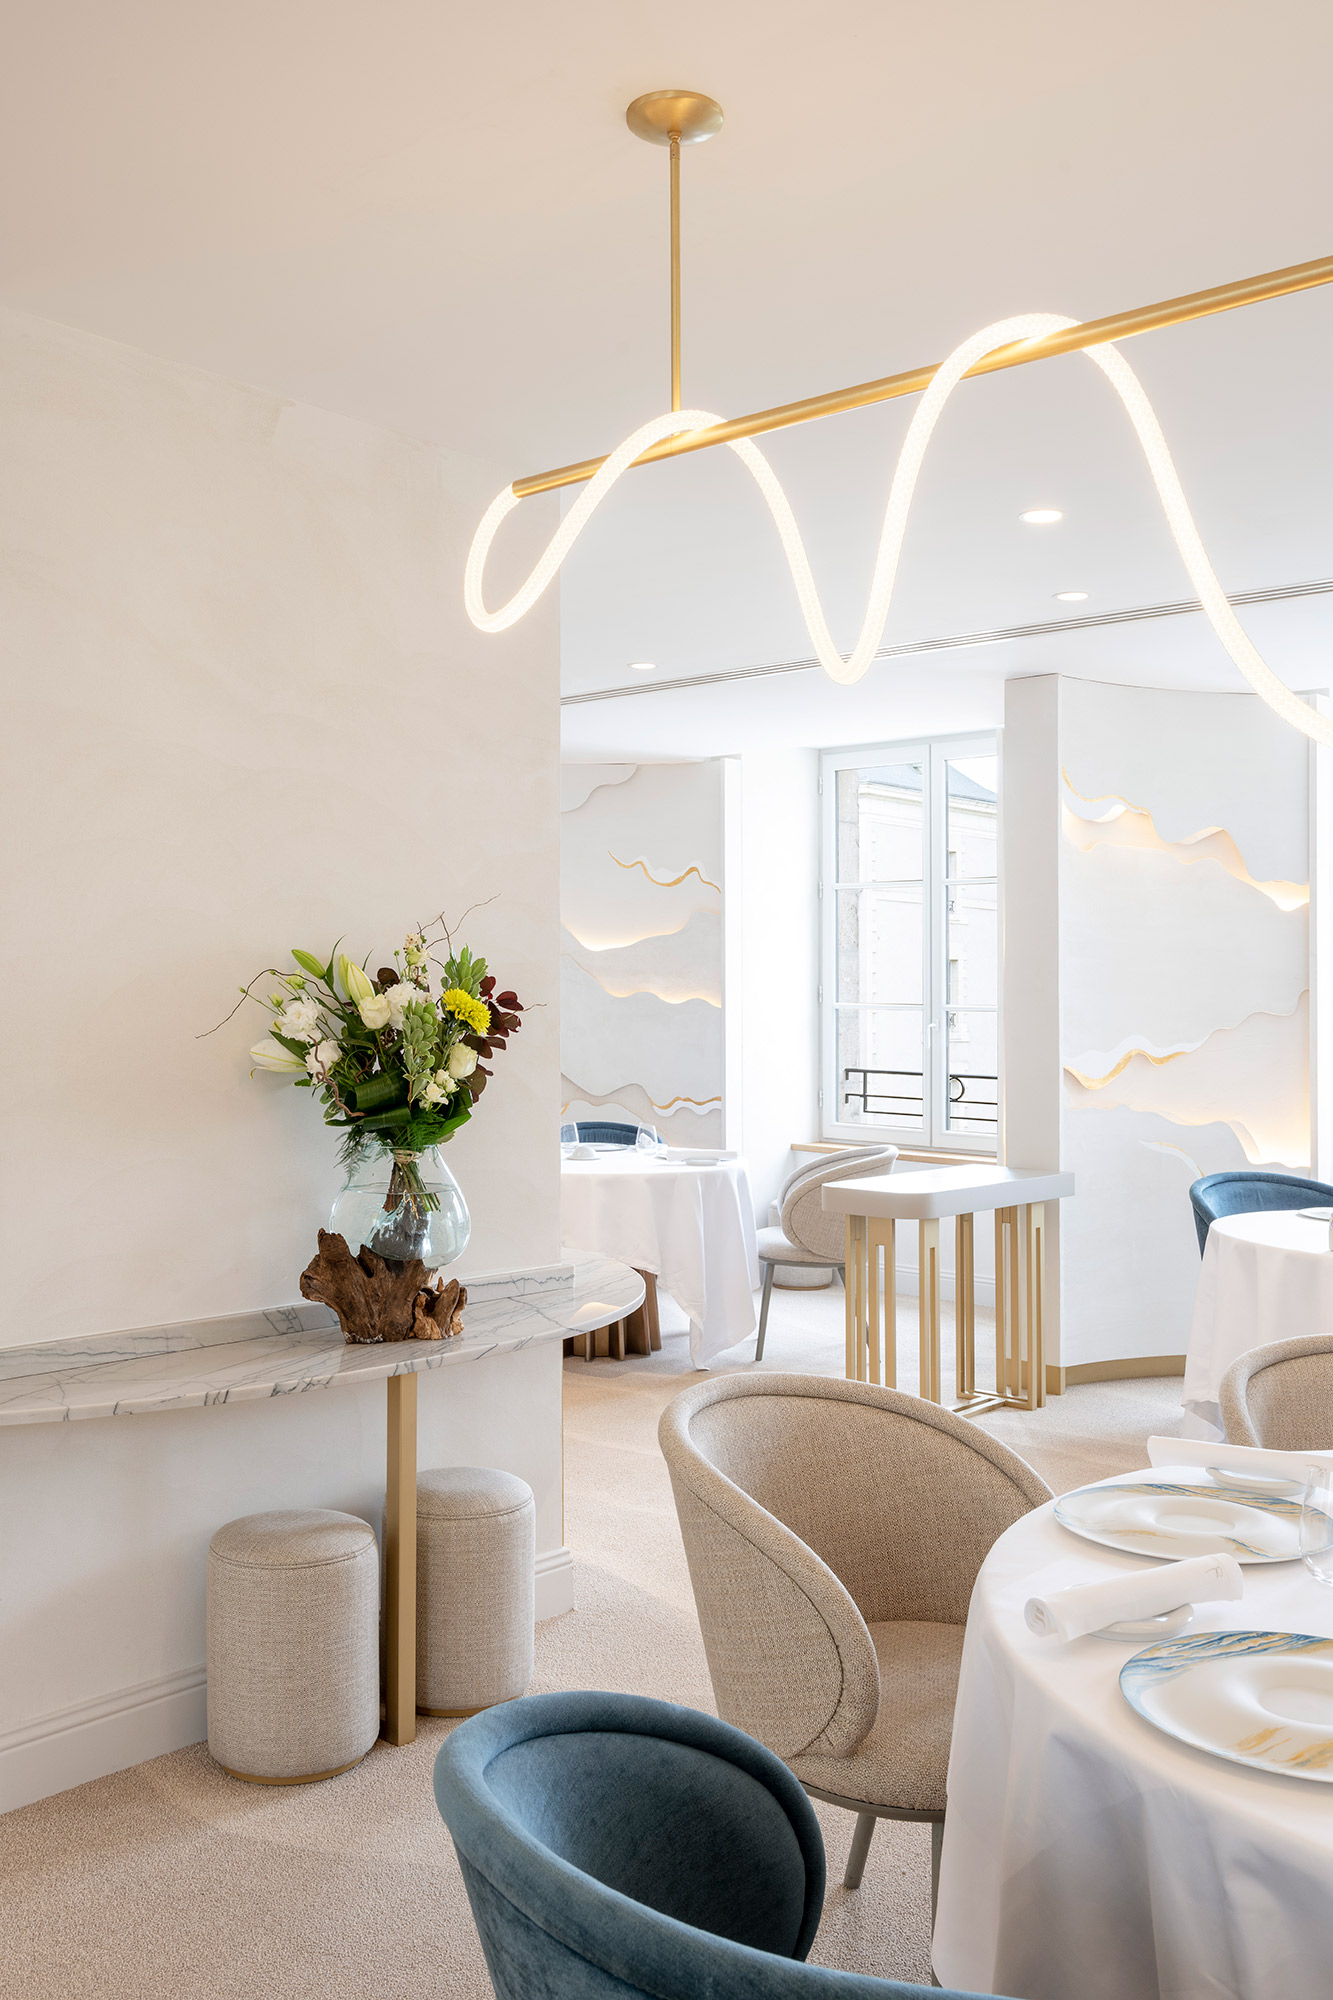 Image of Hotel Fleur de Loire 1 in The sophistication and strength of Cosentino brands for award-winning chef Christophe Hay’s new 5-star hotel  - Cosentino